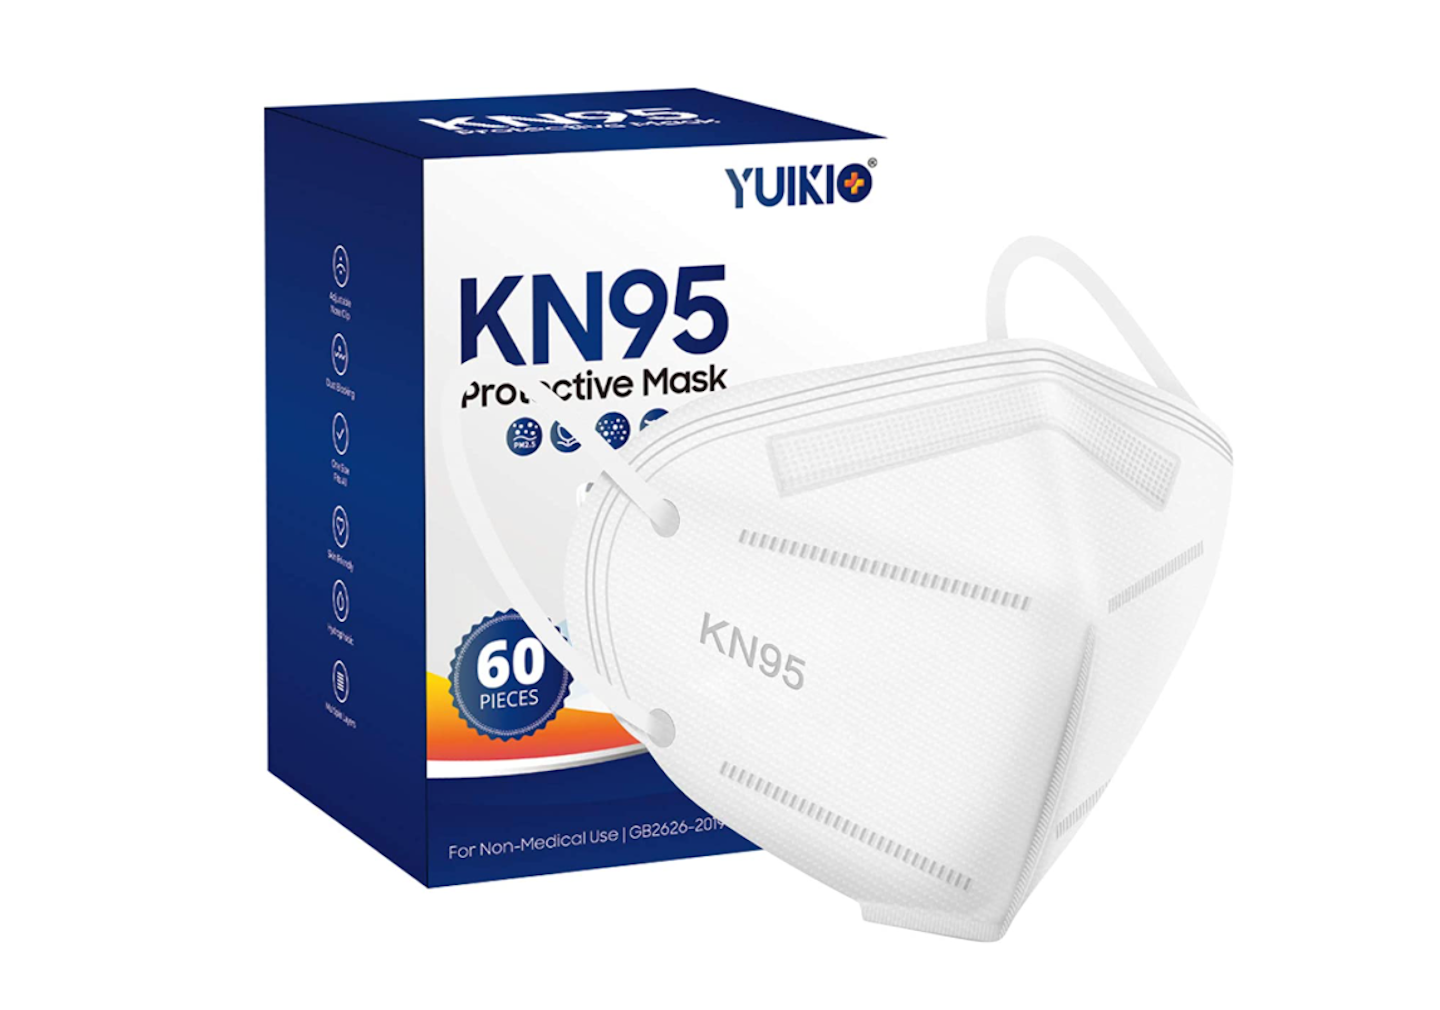 For better protection against COVID, wear an N95 or KN95 mask, said Dr. William Schaffner, medical director of the National Foundation for Infectious Diseases. 'The N95 and KN95 masks clearly provide a superior barrier,” he said. “That's what we use in healthcare when we go into isolation rooms.”